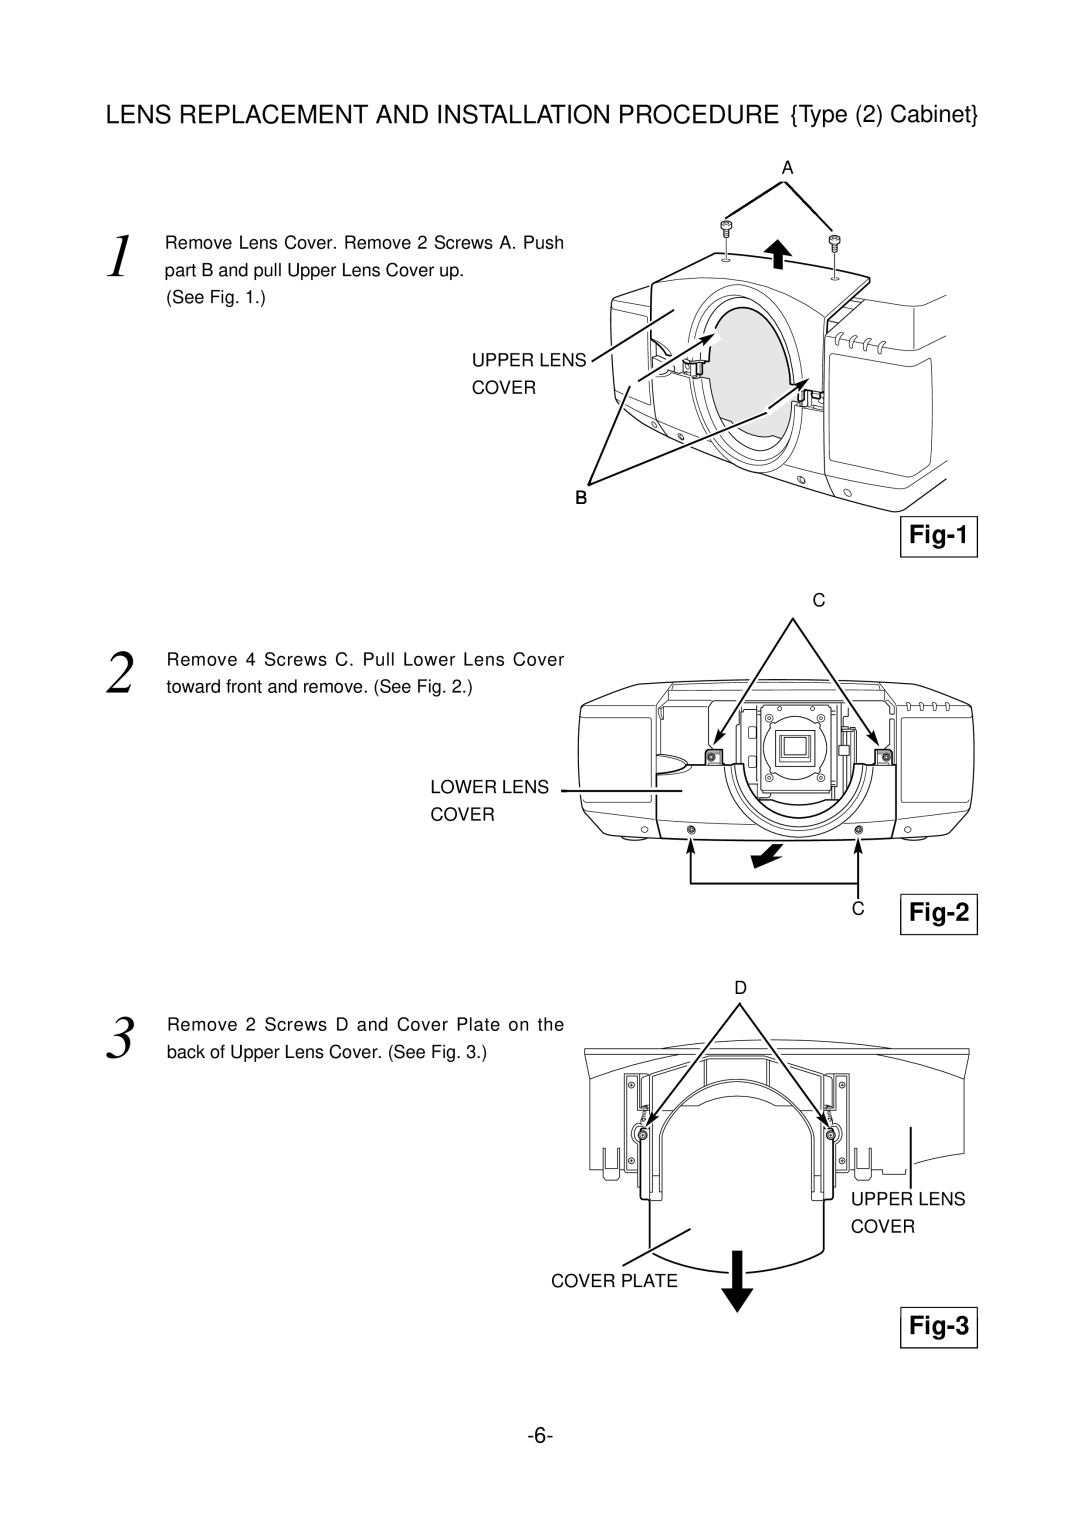 Sanyo LNS-S03 manual LENS REPLACEMENT AND INSTALLATION PROCEDURE Type 2 Cabinet, Fig-1 Fig-2, Fig-3 